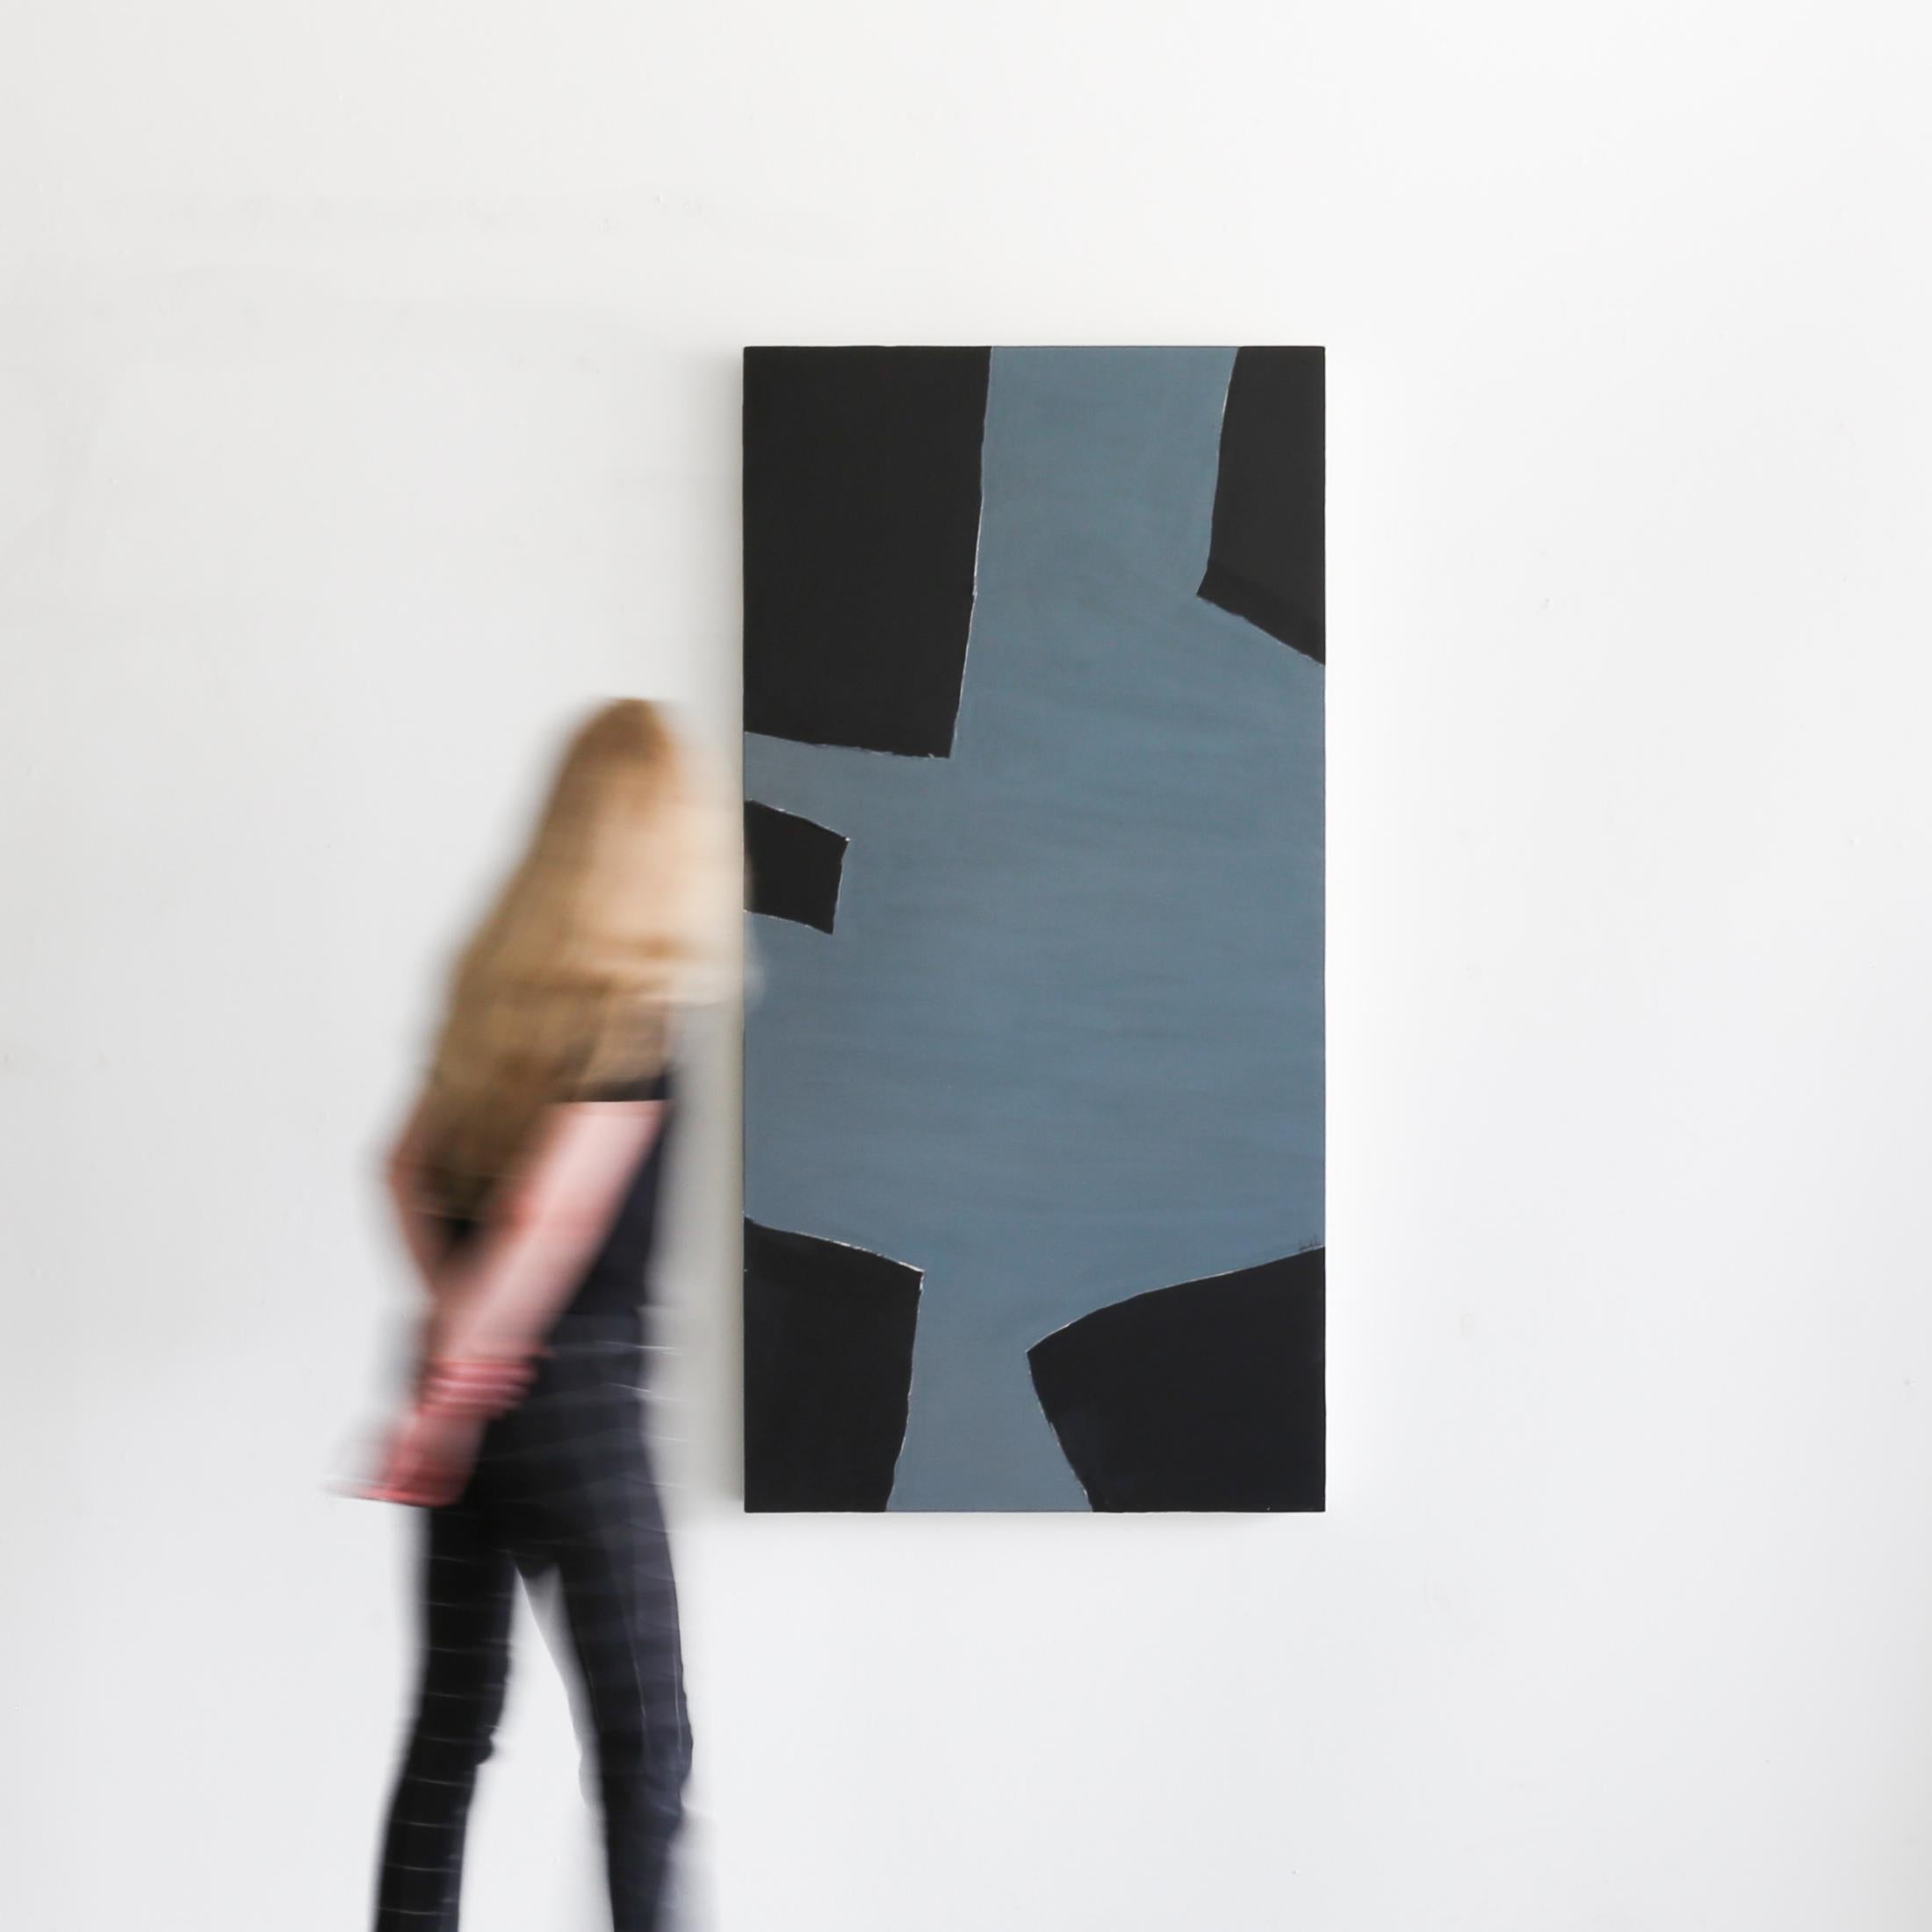 Holly Addi makes paintings to explore the art of abstraction and the philosophy of beauty in imperfection.